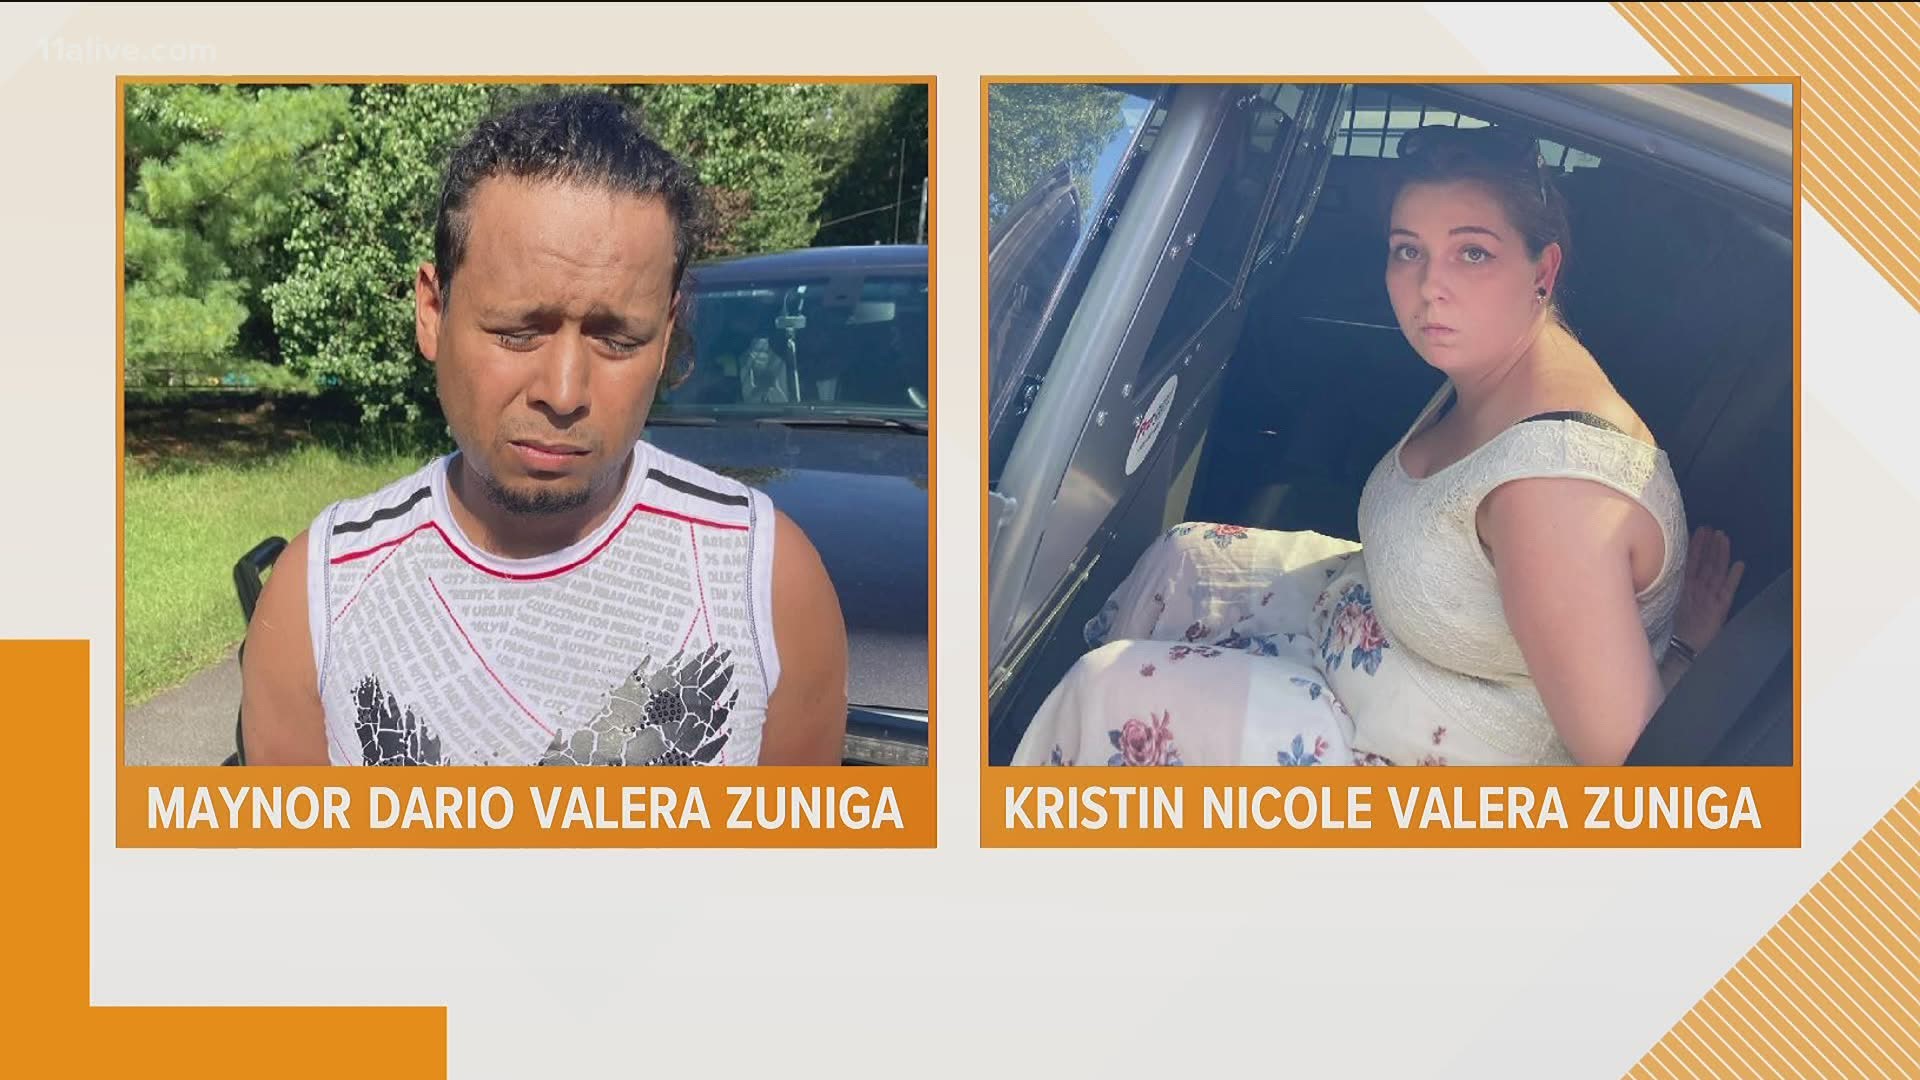 They were arrested in Carroll County, hours after the kidnapping took place in Chamblee.